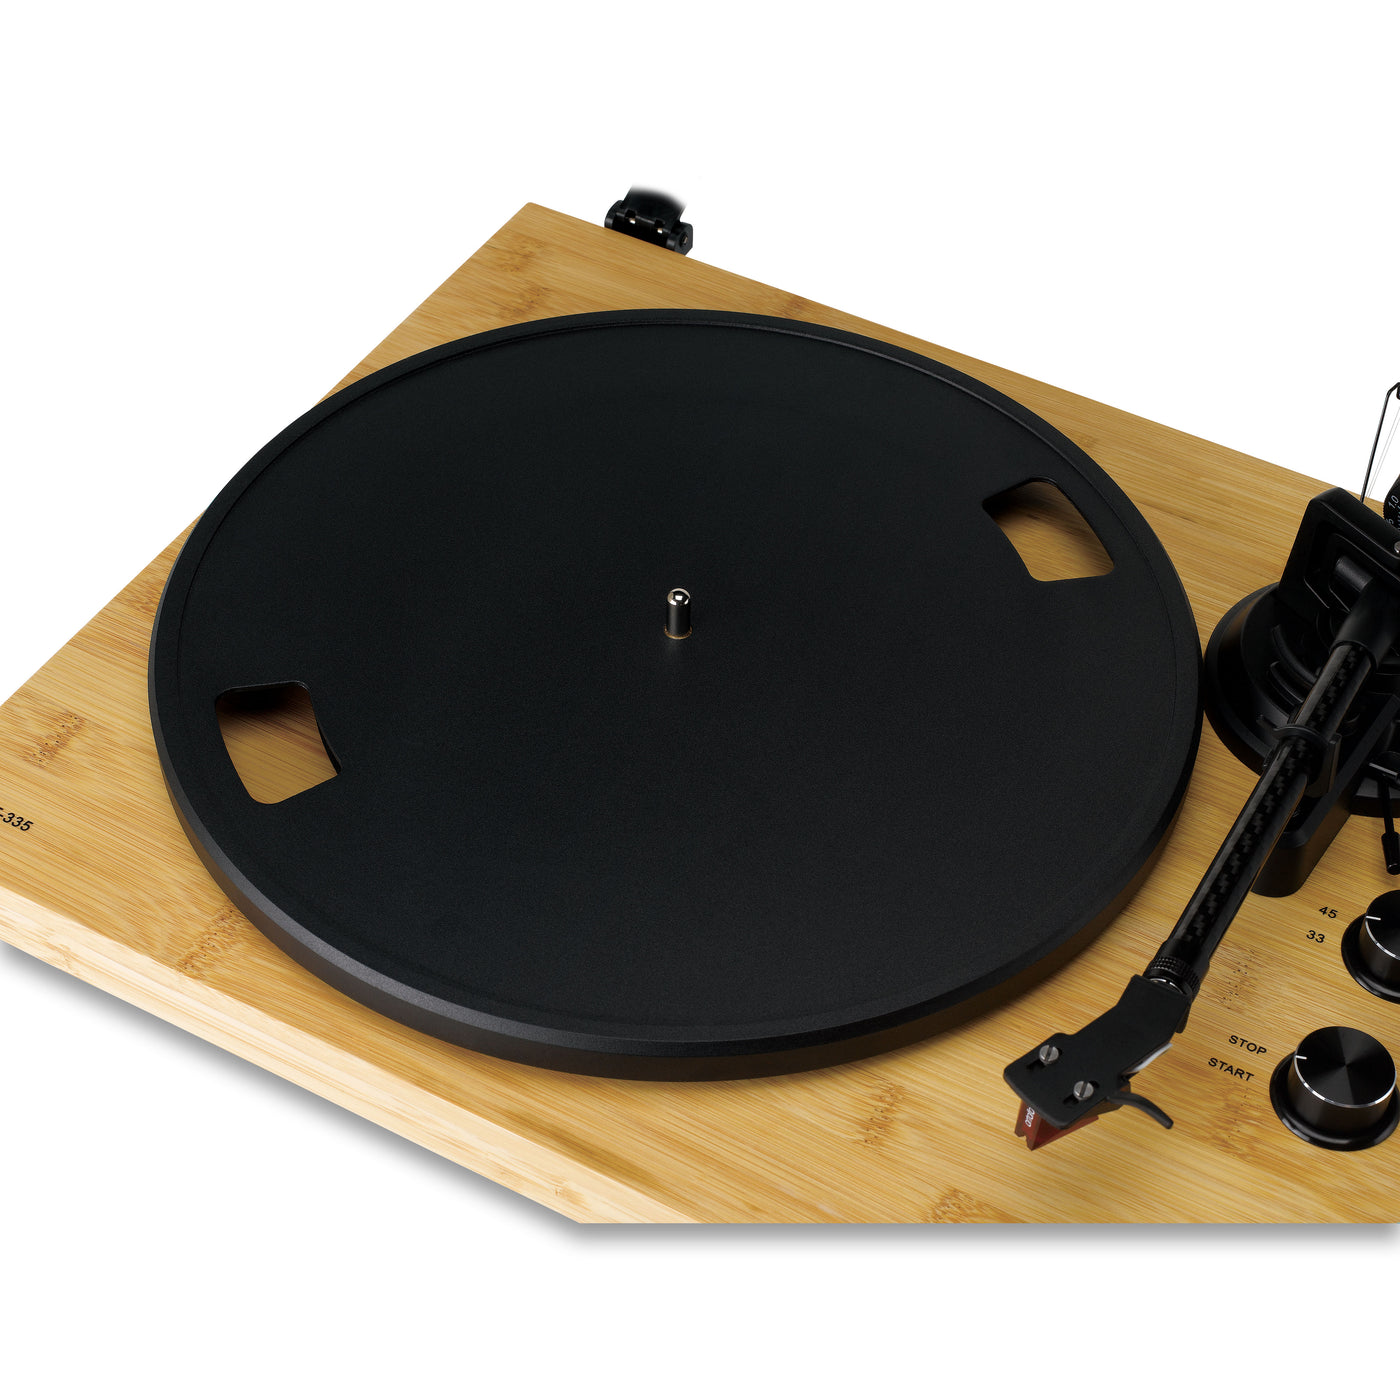 LENCO LBT-335BA - Turntable with Bluetooth®, bamboo housing, and Ortofon 2M Red cartridge